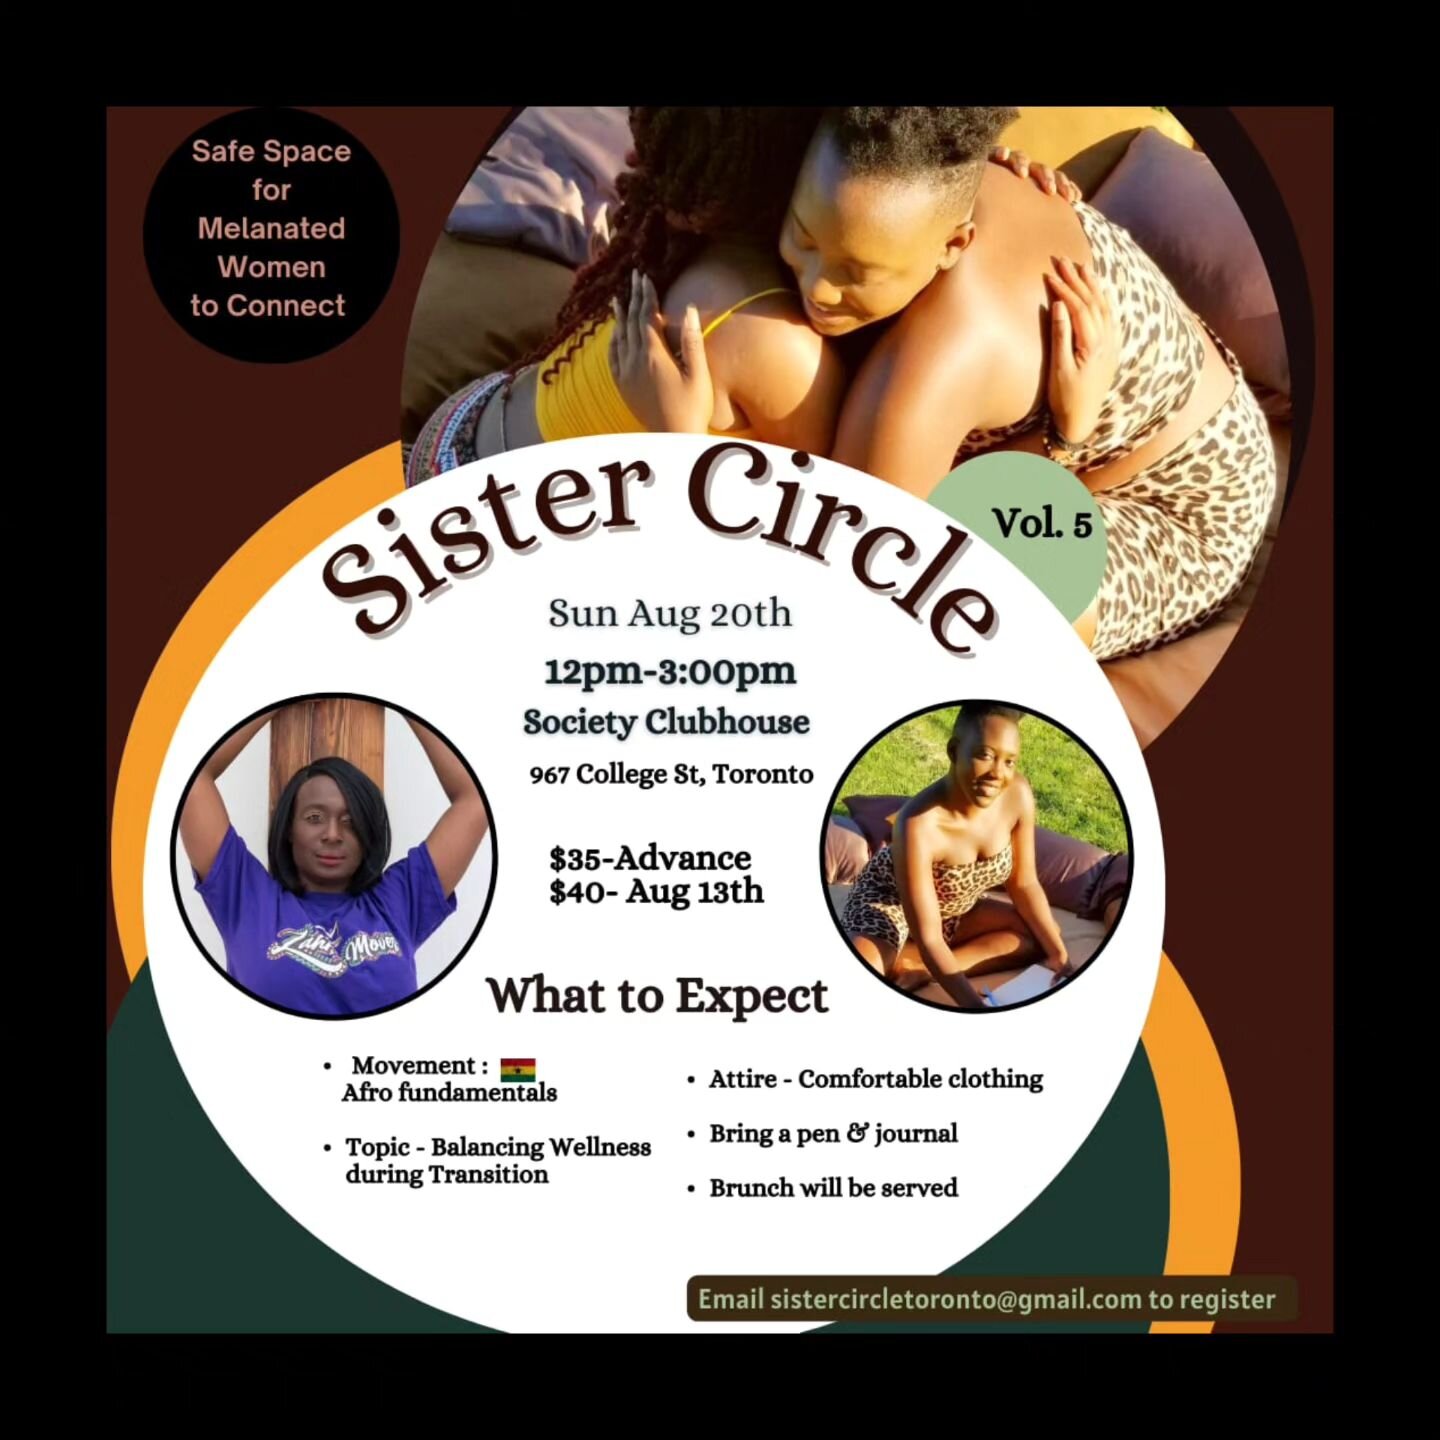 The Sister Circle is a wonderful gathering of melanated women. During these events, there is movement, discussions, collective wellness, joy, and food.

🗓: Sunday, August 20th
🕐: 12pm to 3:30pm
📍: 967 College Street
Cost: 
$35 in advance 
$40 star